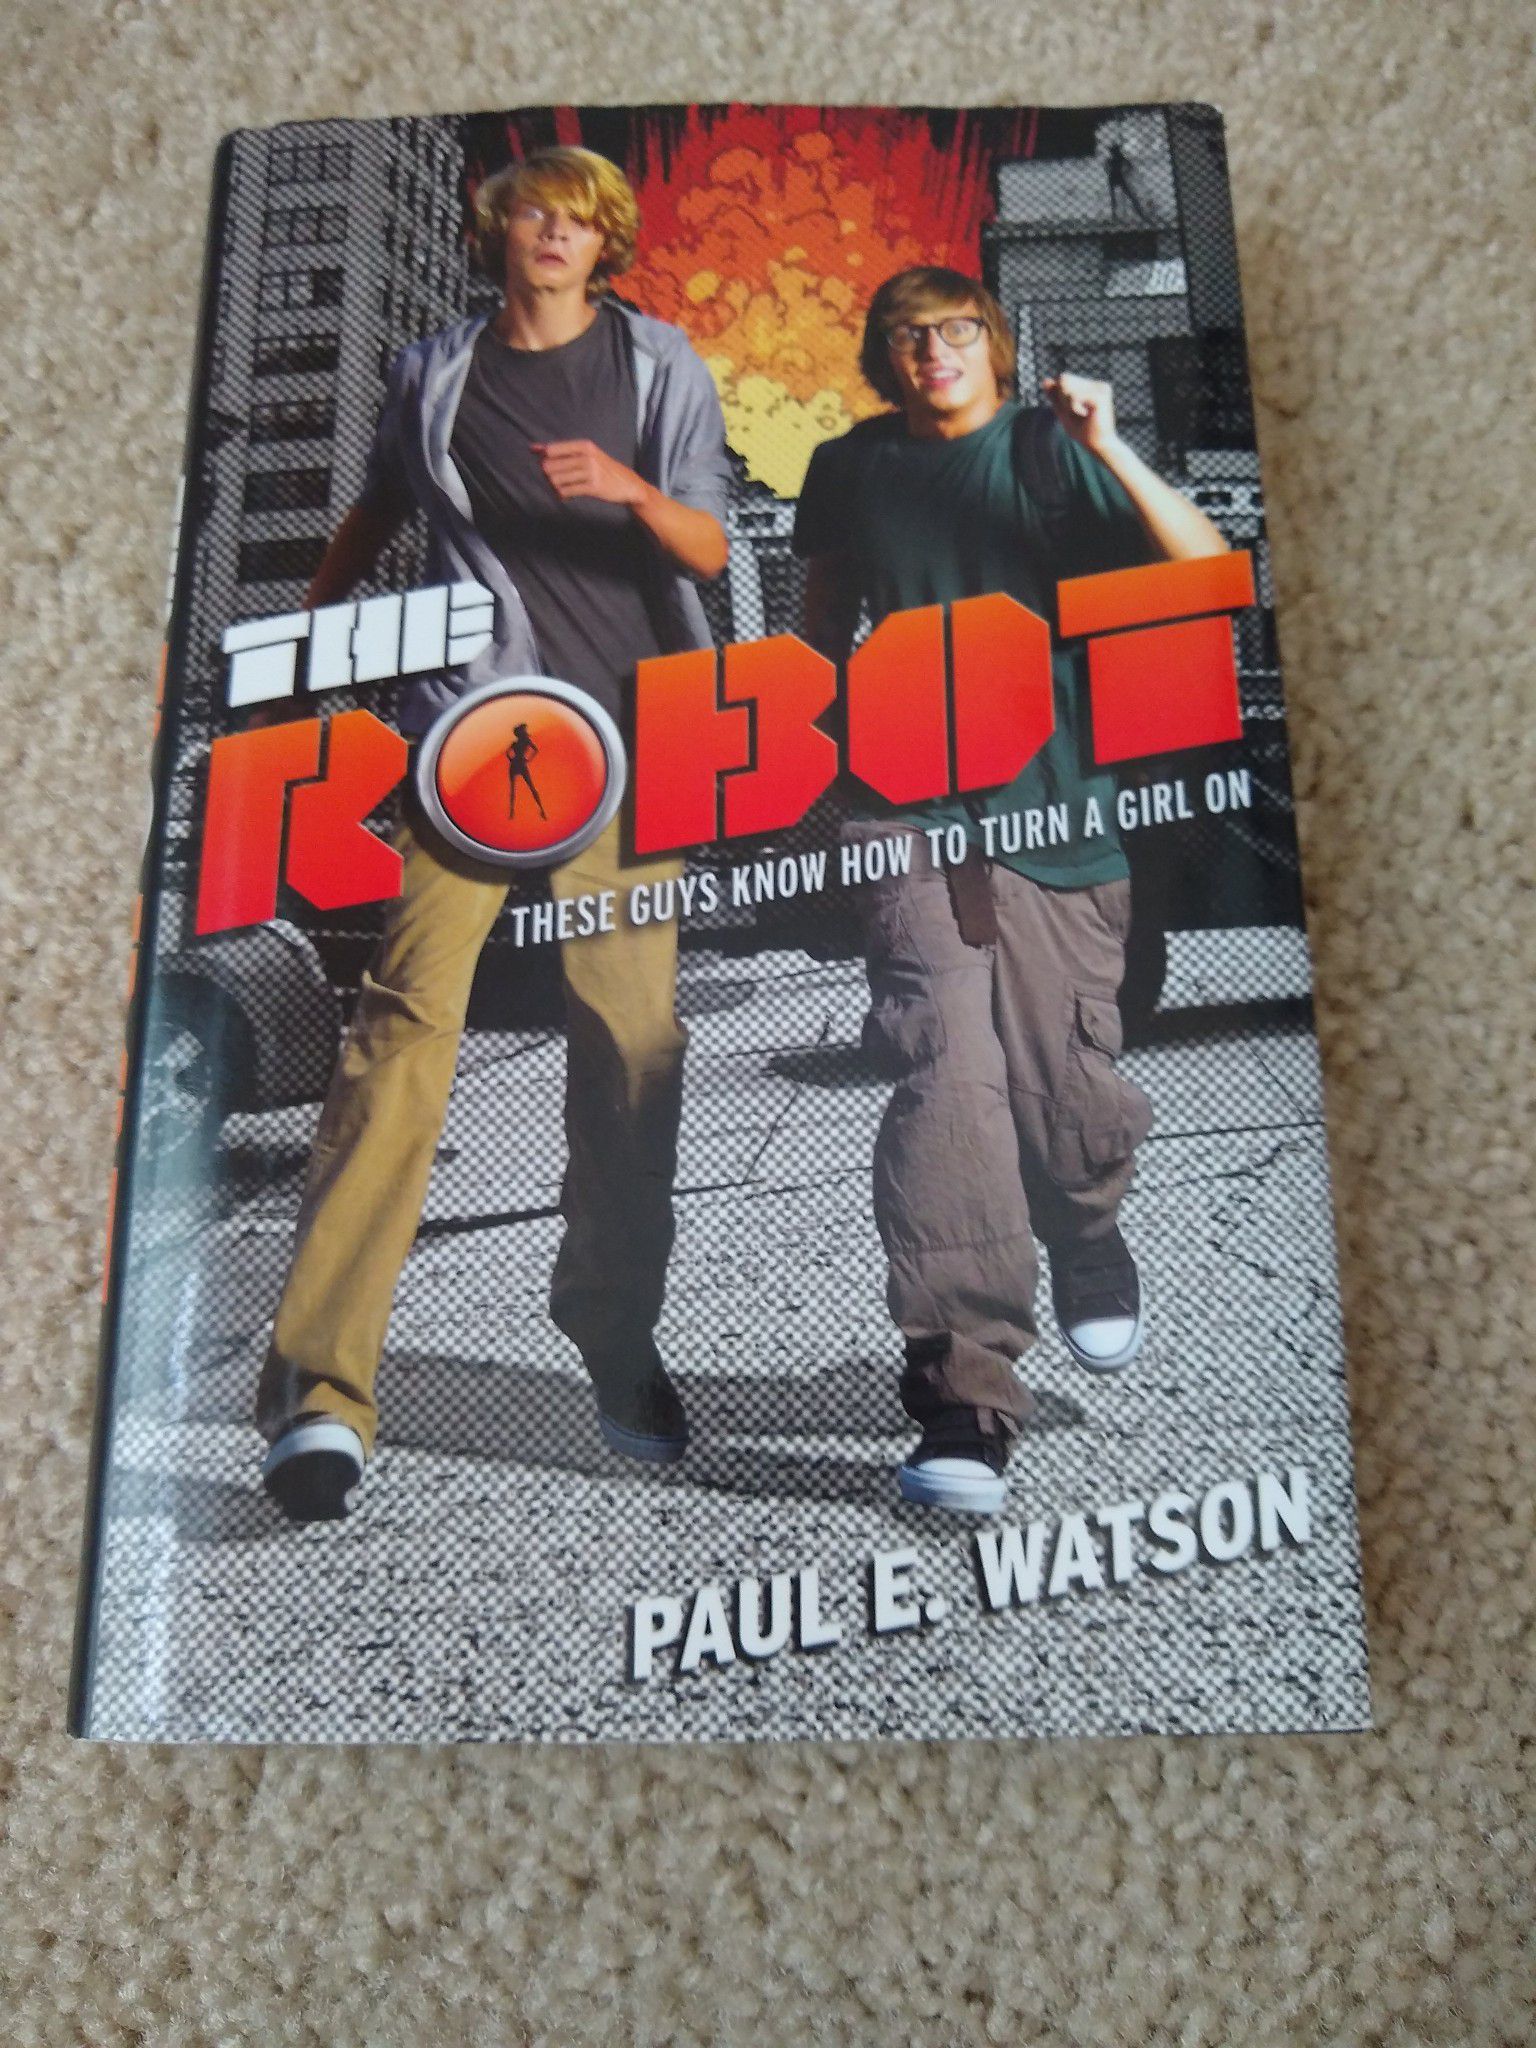 The Robot by Paul Watson (2011, Hardcover). Condition is Brand New.